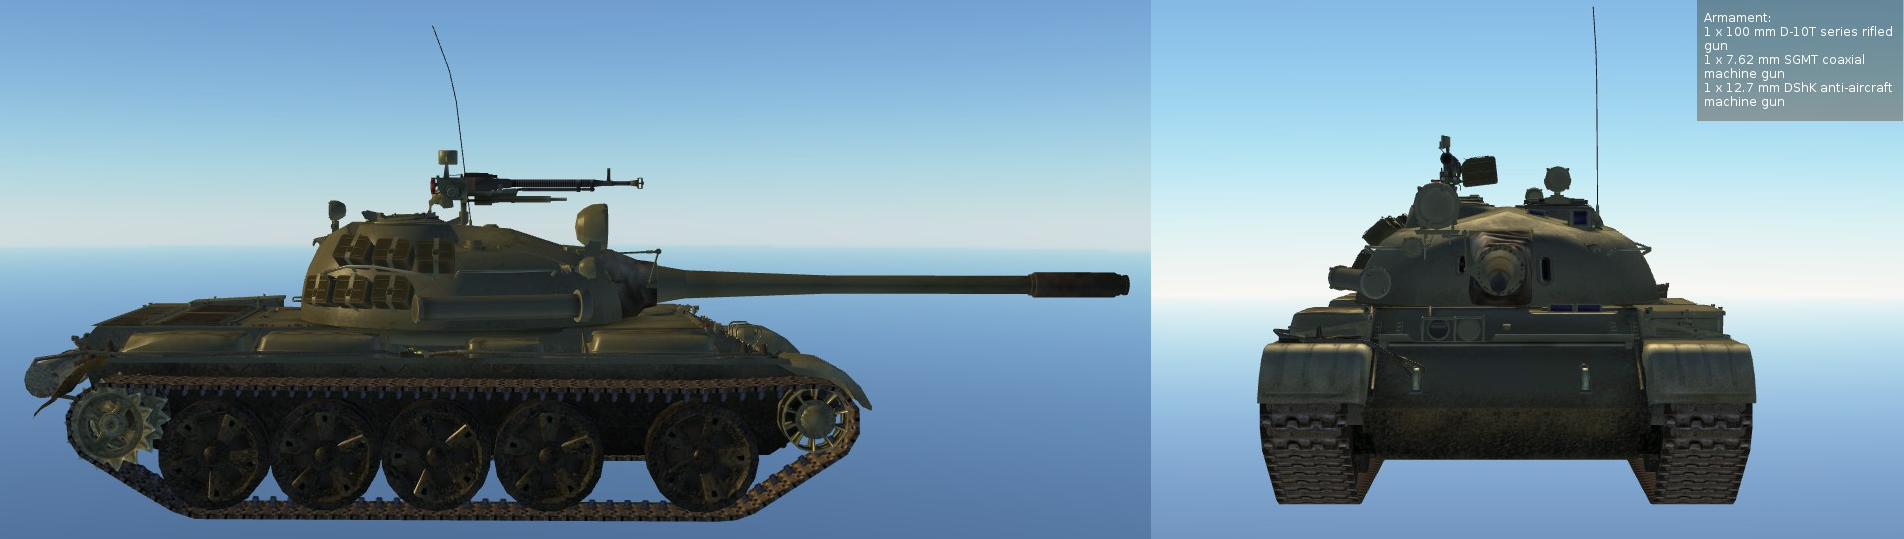 T-55.png